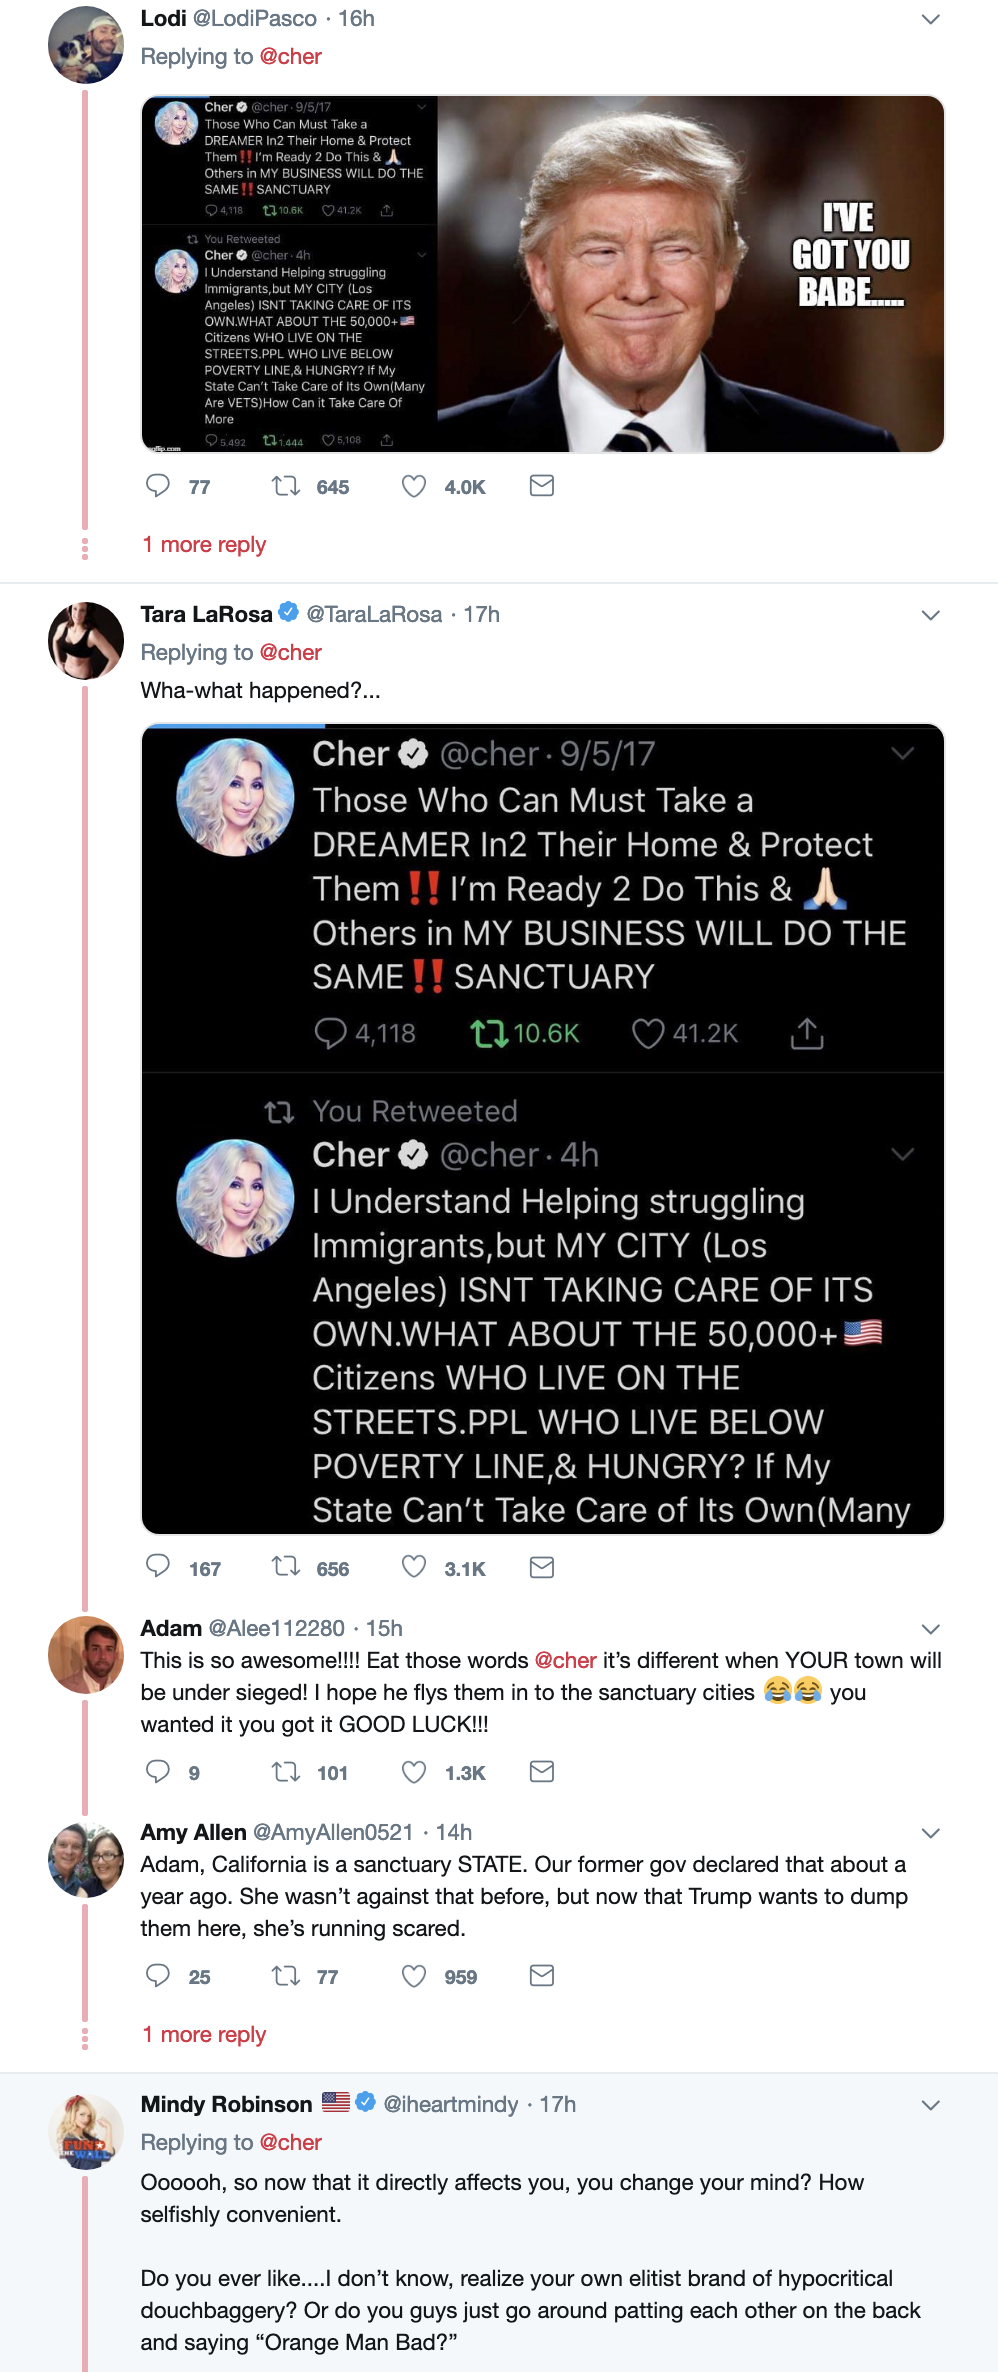 Screen-Shot-2019-04-15-at-11.35.31-AM Trump Tweets About Cher Like He Wants To Turn Back Time Celebrities Corruption Crime Domestic Policy Donald Trump Immigration Politics Racism Refugees Top Stories 